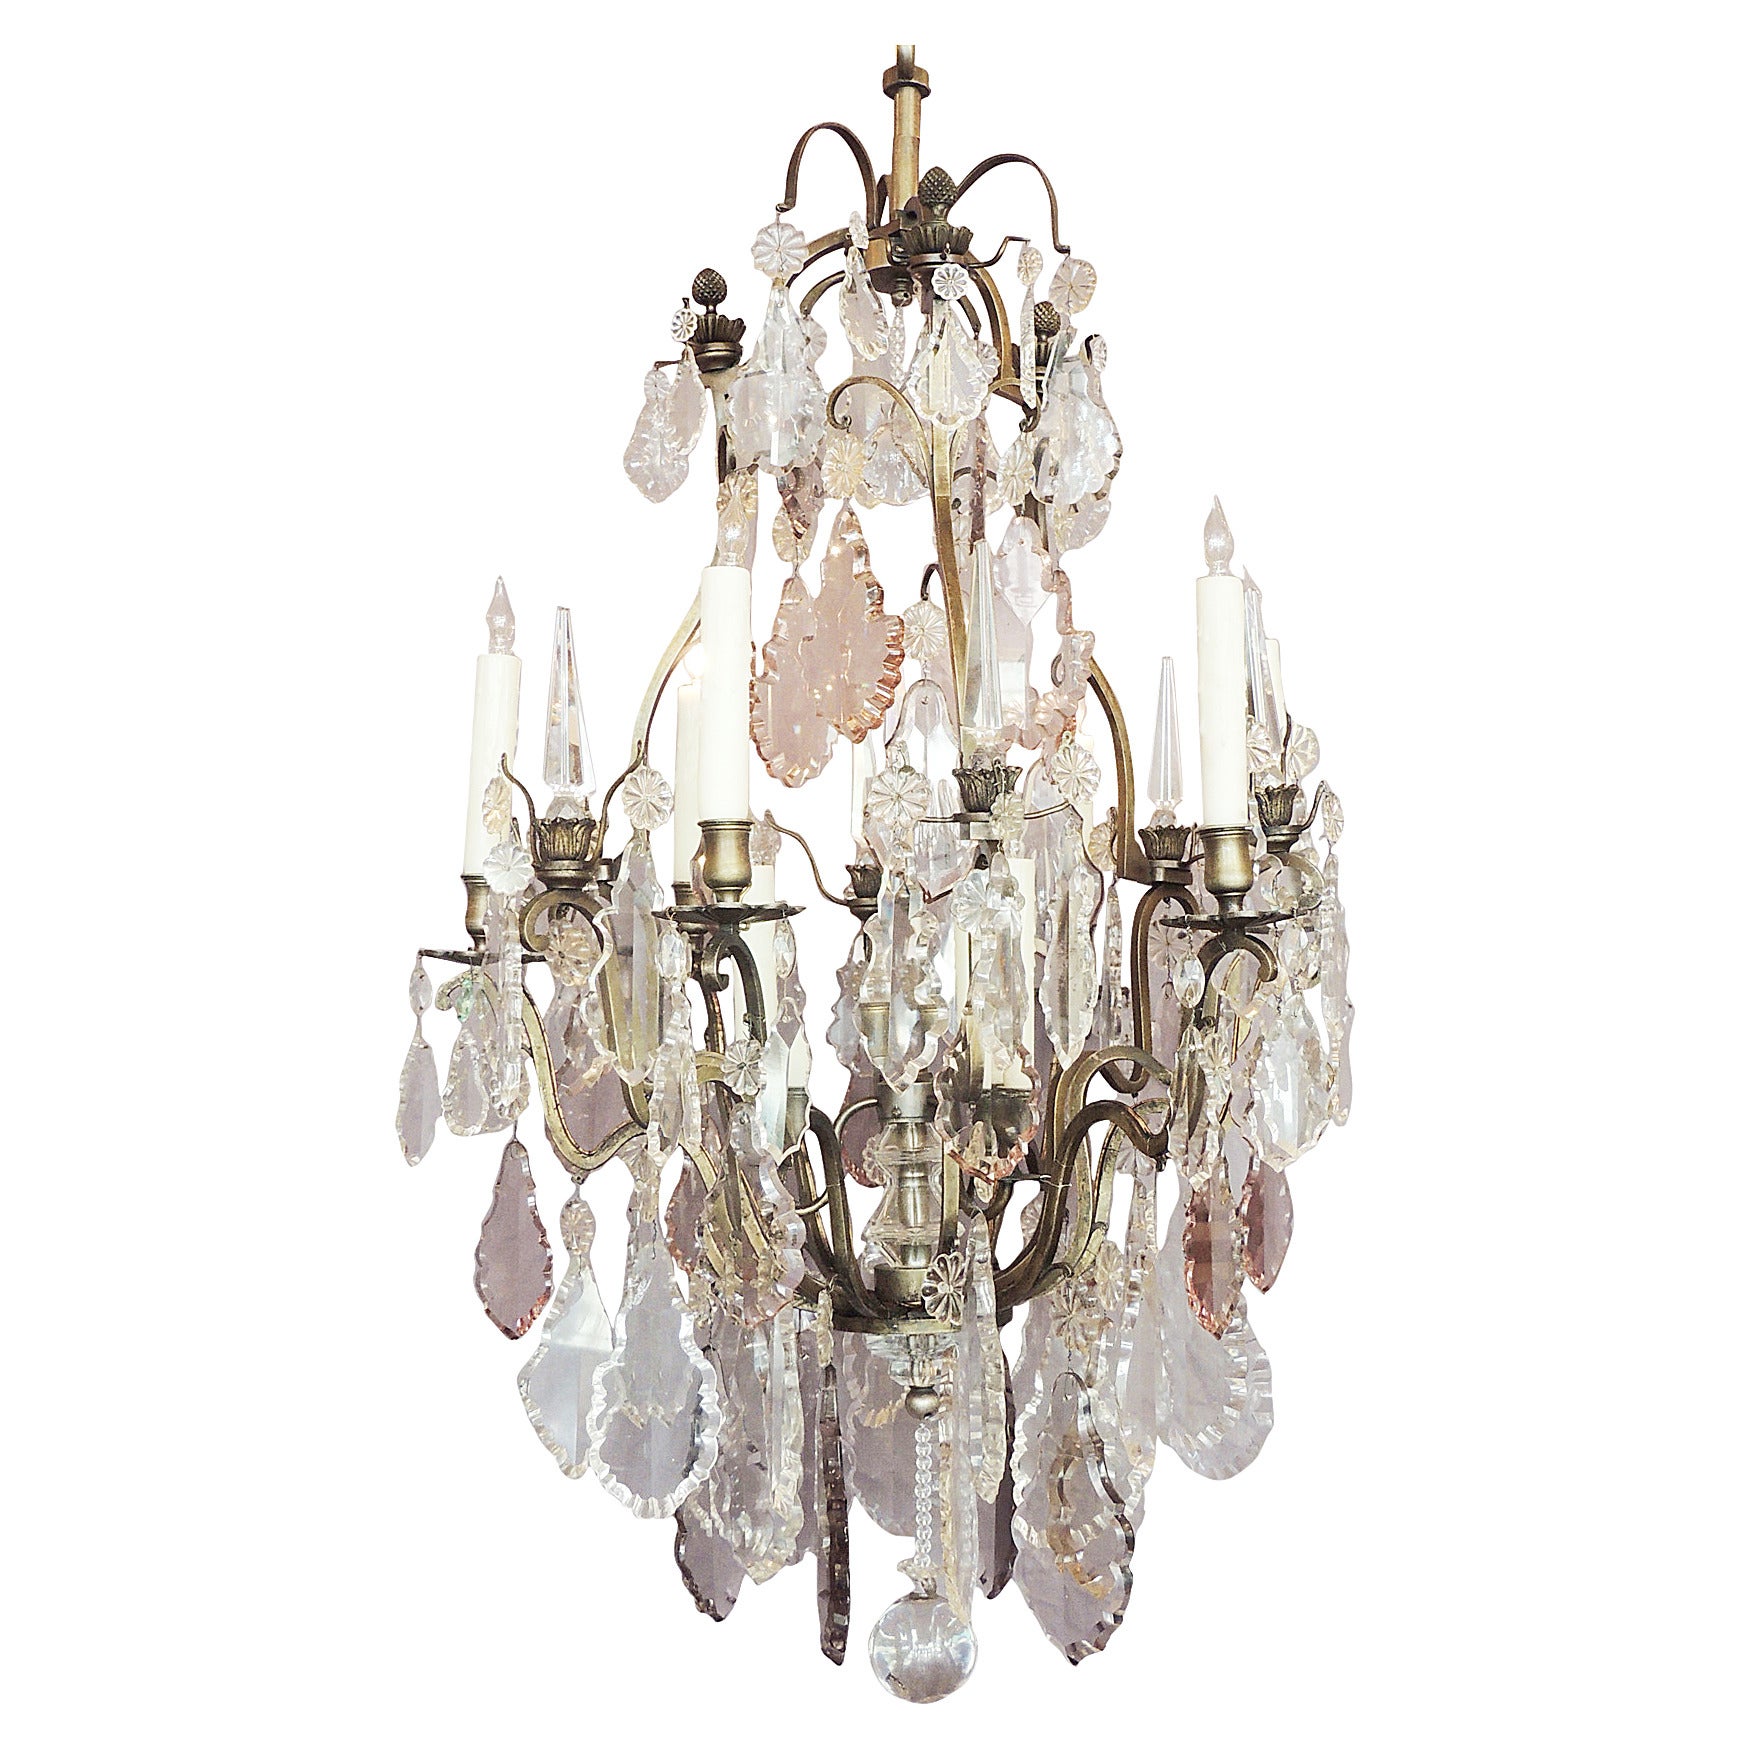 Late 19th C French Crystal and Bronze Chandelier, signed Vian Henri